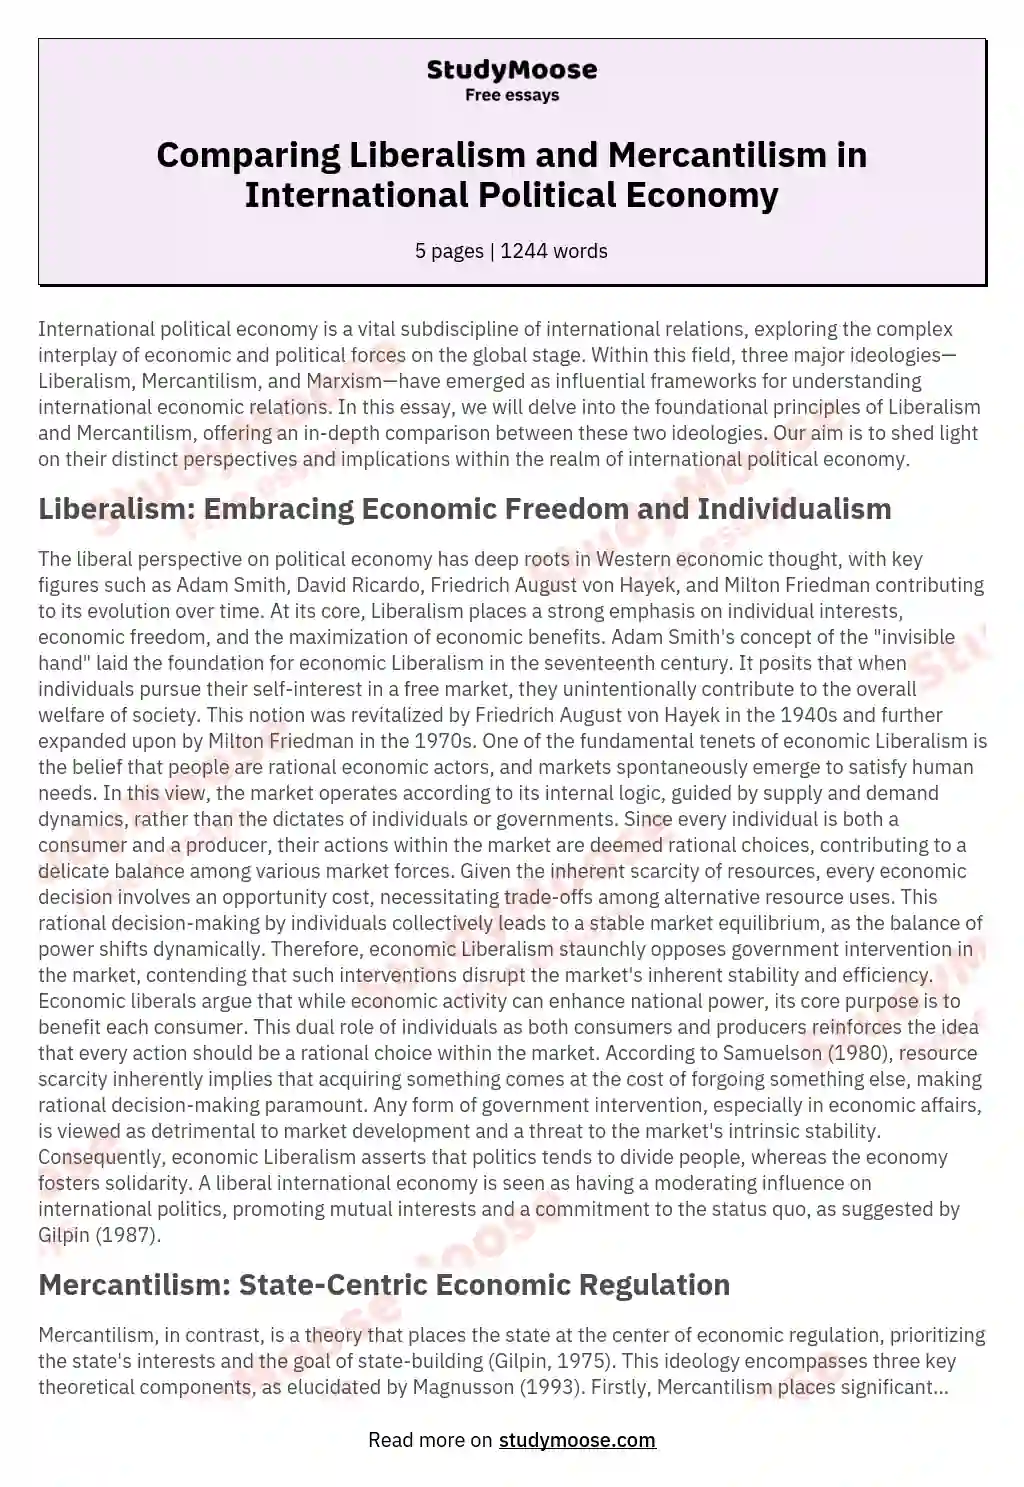 Comparing Liberalism and Mercantilism in International Political Economy essay